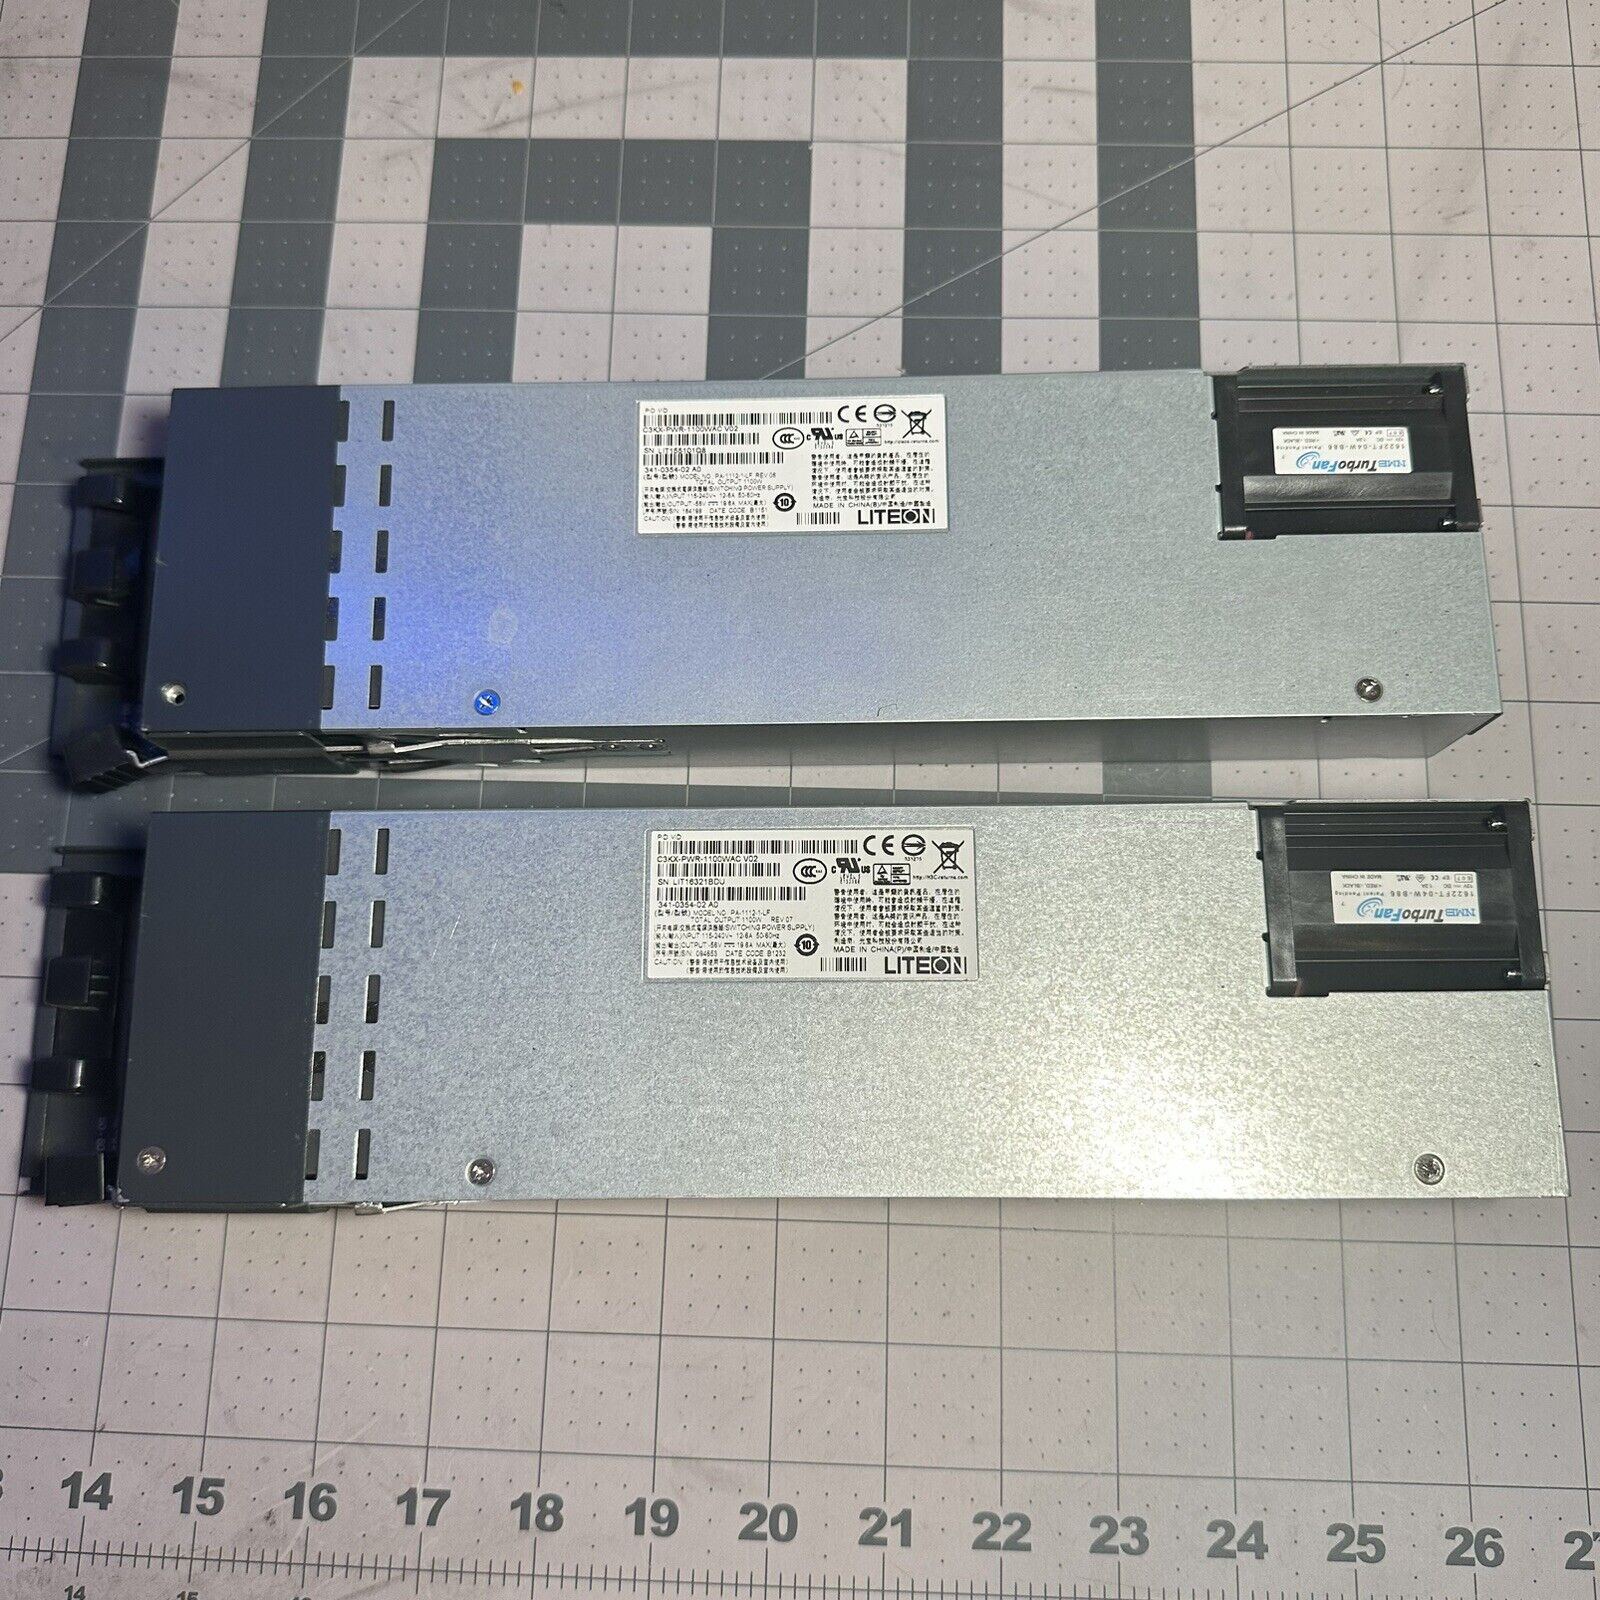 LOT OF 2 Cisco Catalyst C3KX-PWR-1100WAC V02 AC Power Supply FOR 3560X/3750X